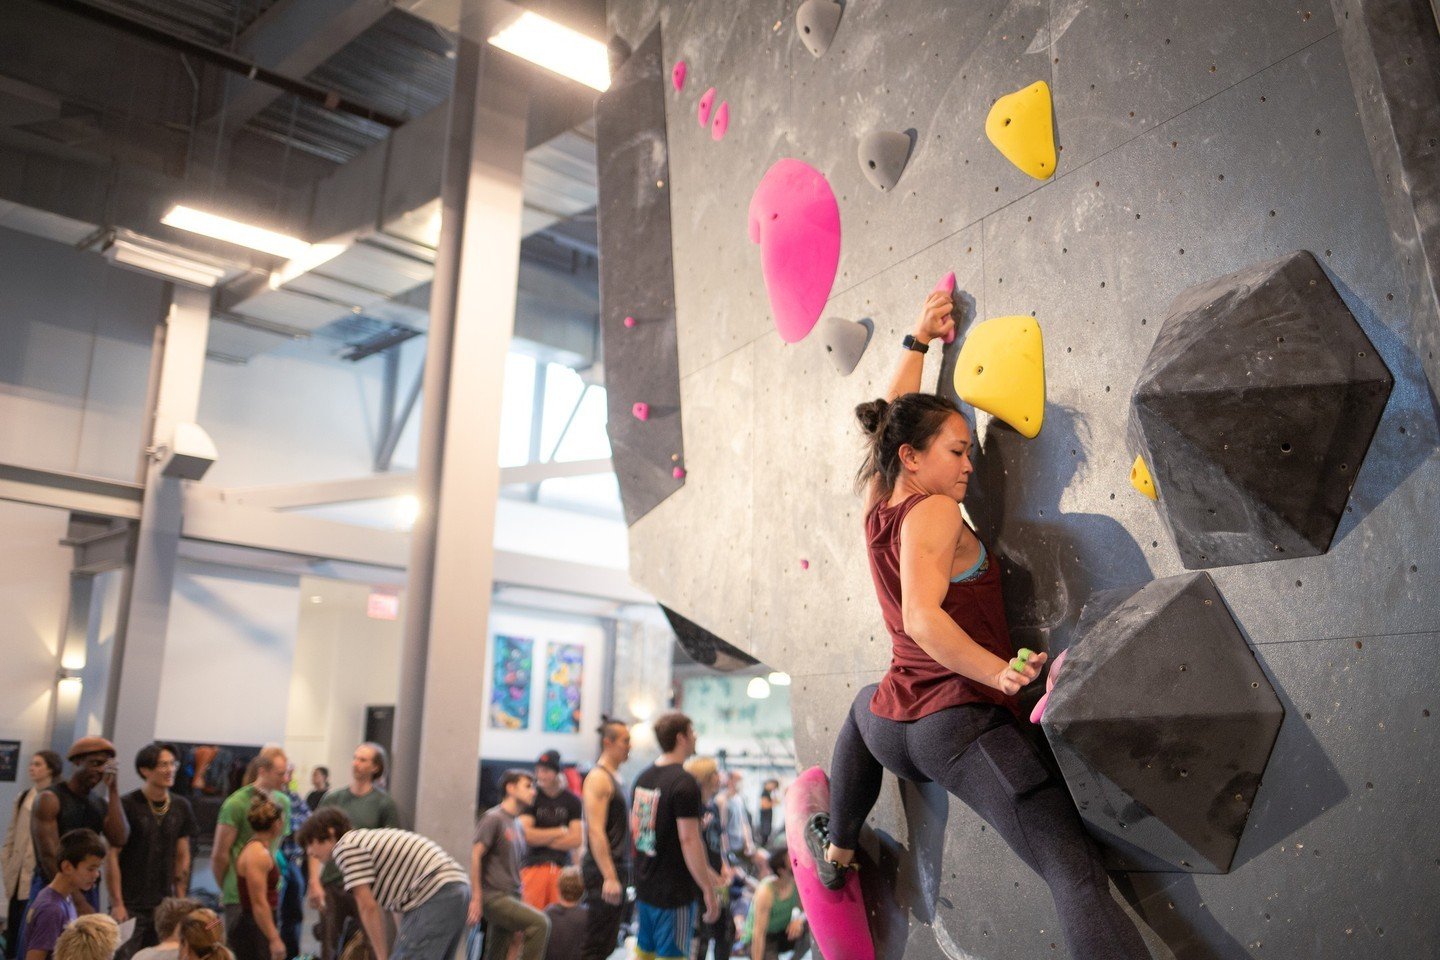 It&rsquo;s been three years since we opened: three years of making new friends, sending climbs, reaching goals, learning new skills, and so much more! We want to celebrate all of our members who have been on this journey with us, whether you&rsquo;ve